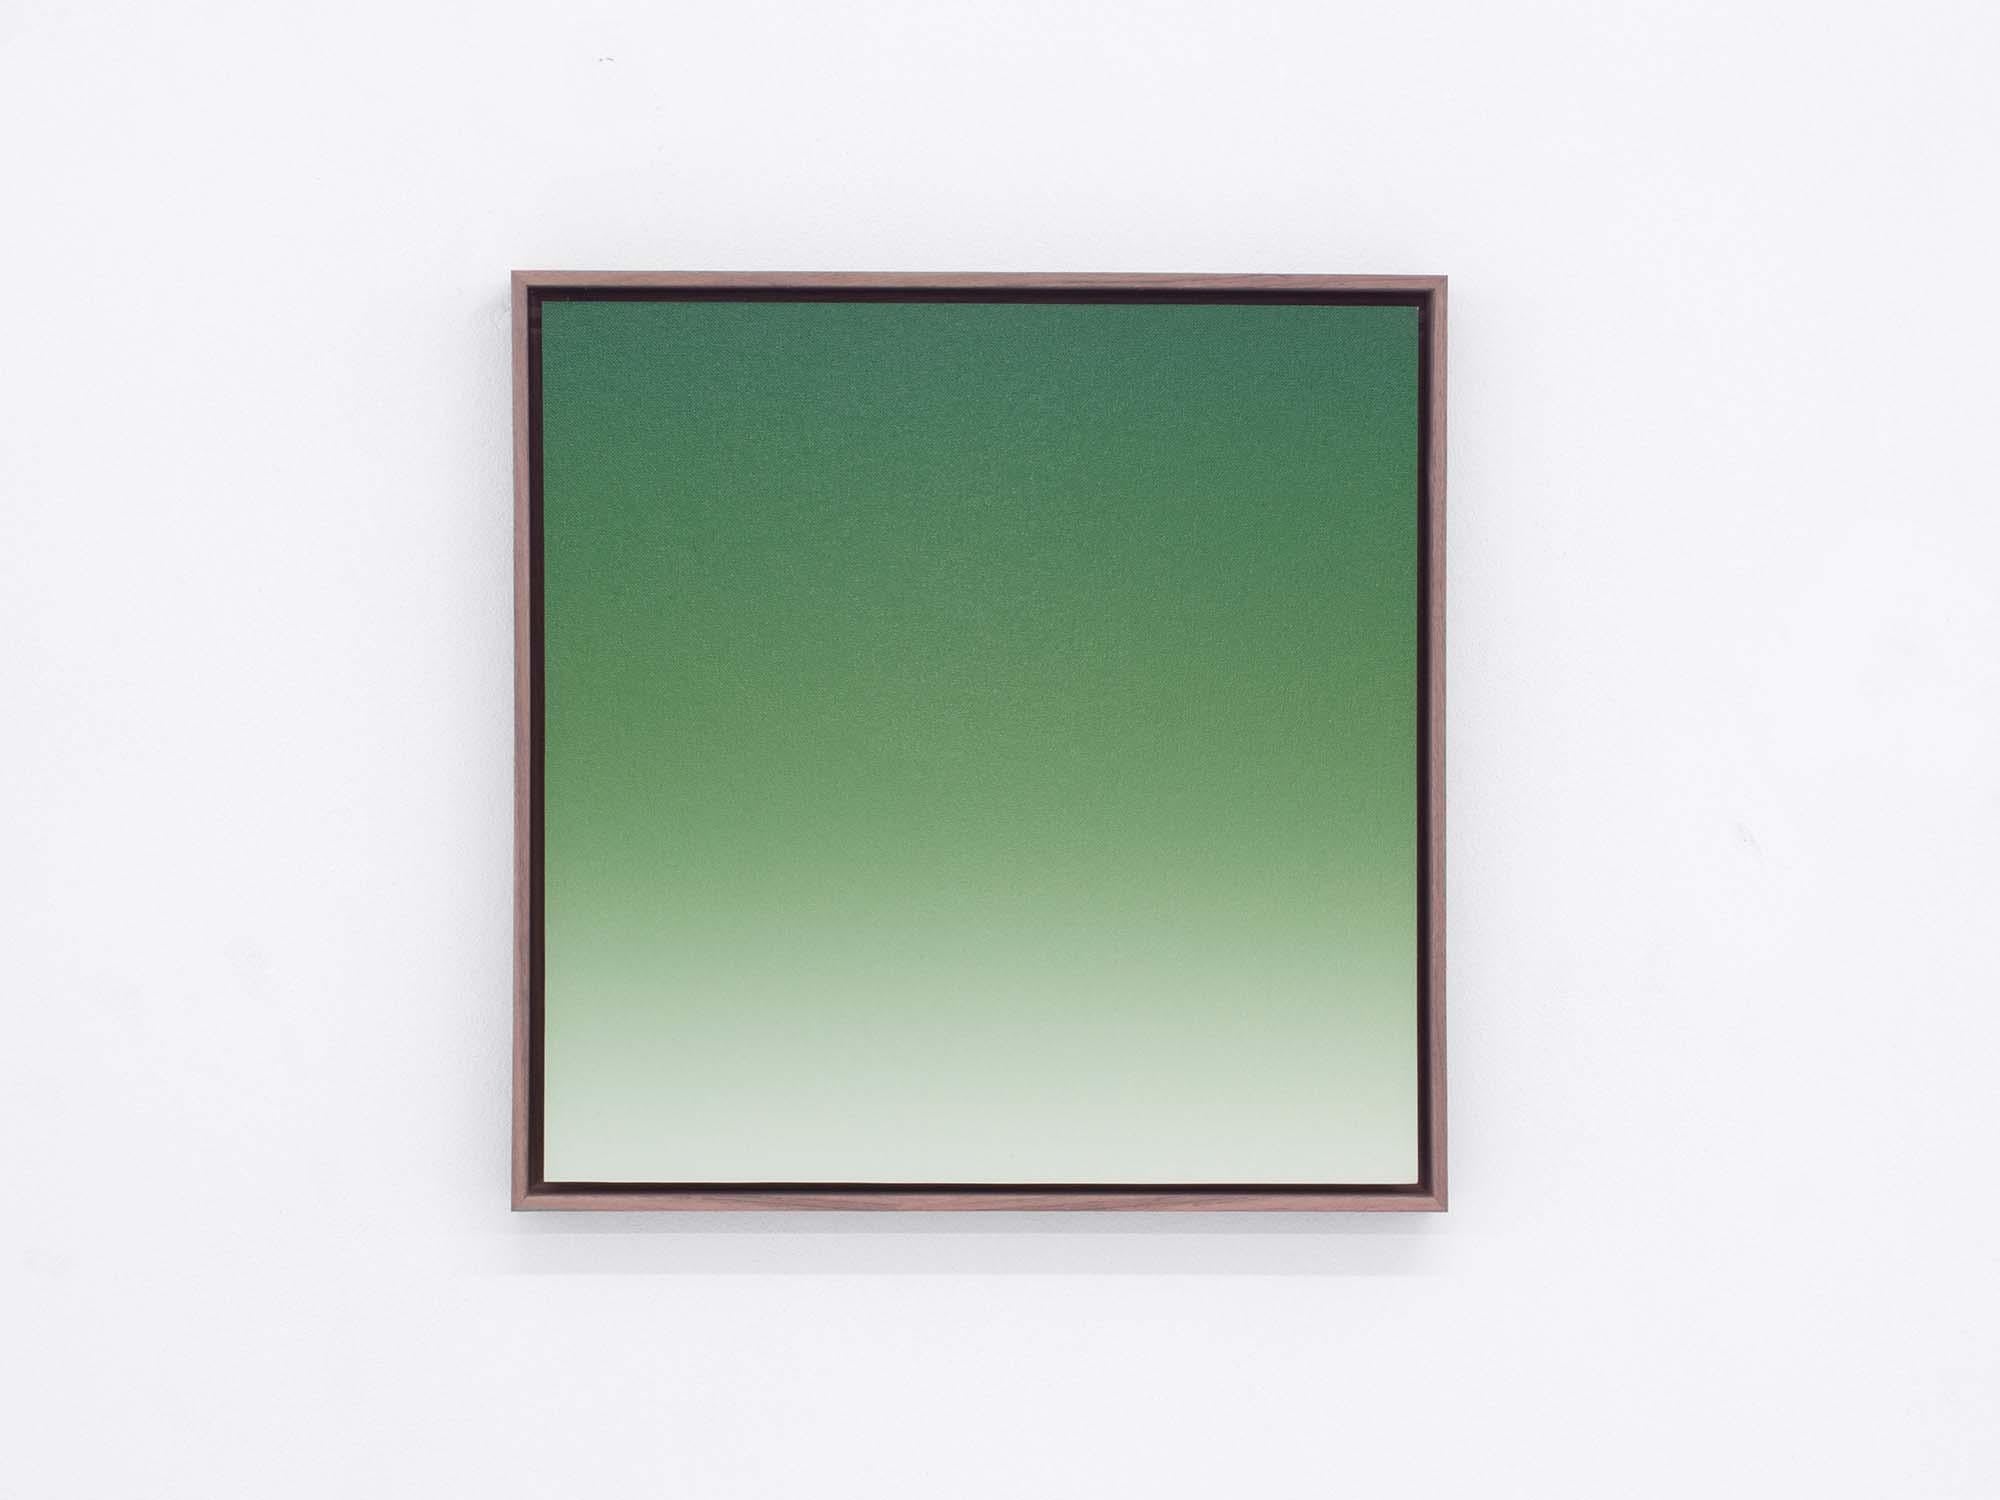 Donald Schenkel - Green Square No.1 For Sale at 1stDibs